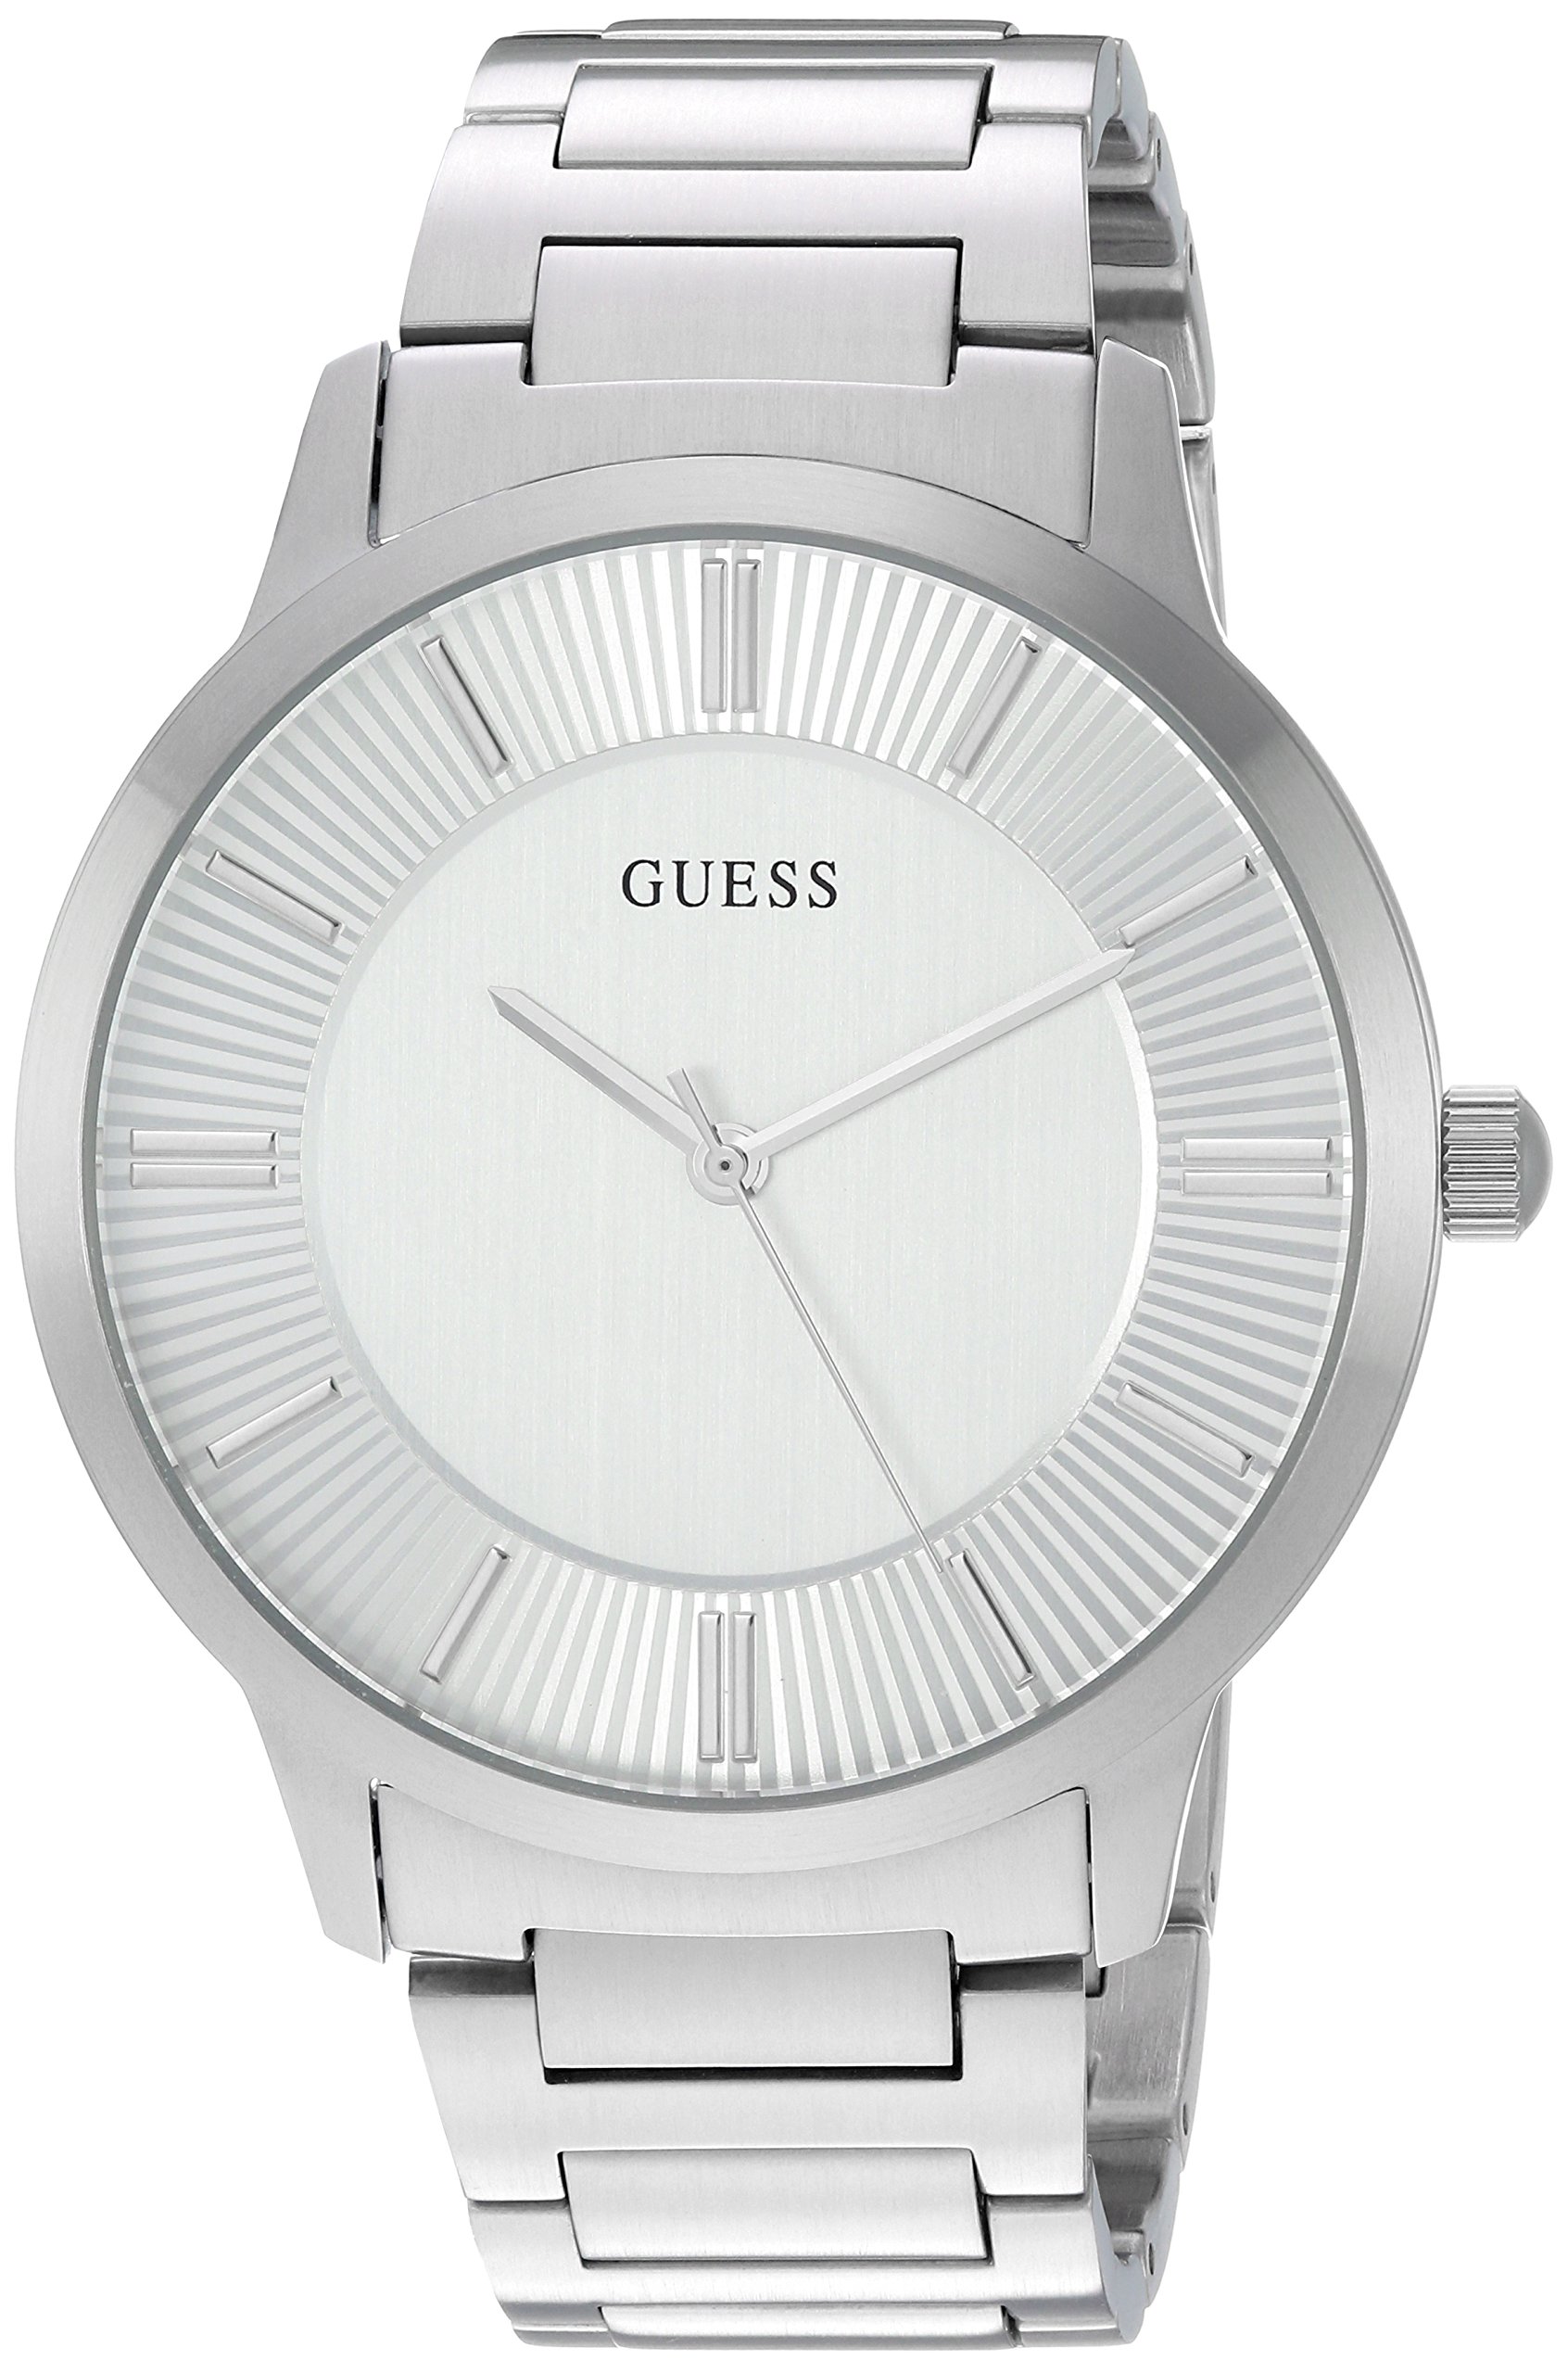 Đồng hồ GUESS Men's Stainless Steel Casual Bracelet Watch, Color Silver-Tone (Model: U0990G2)